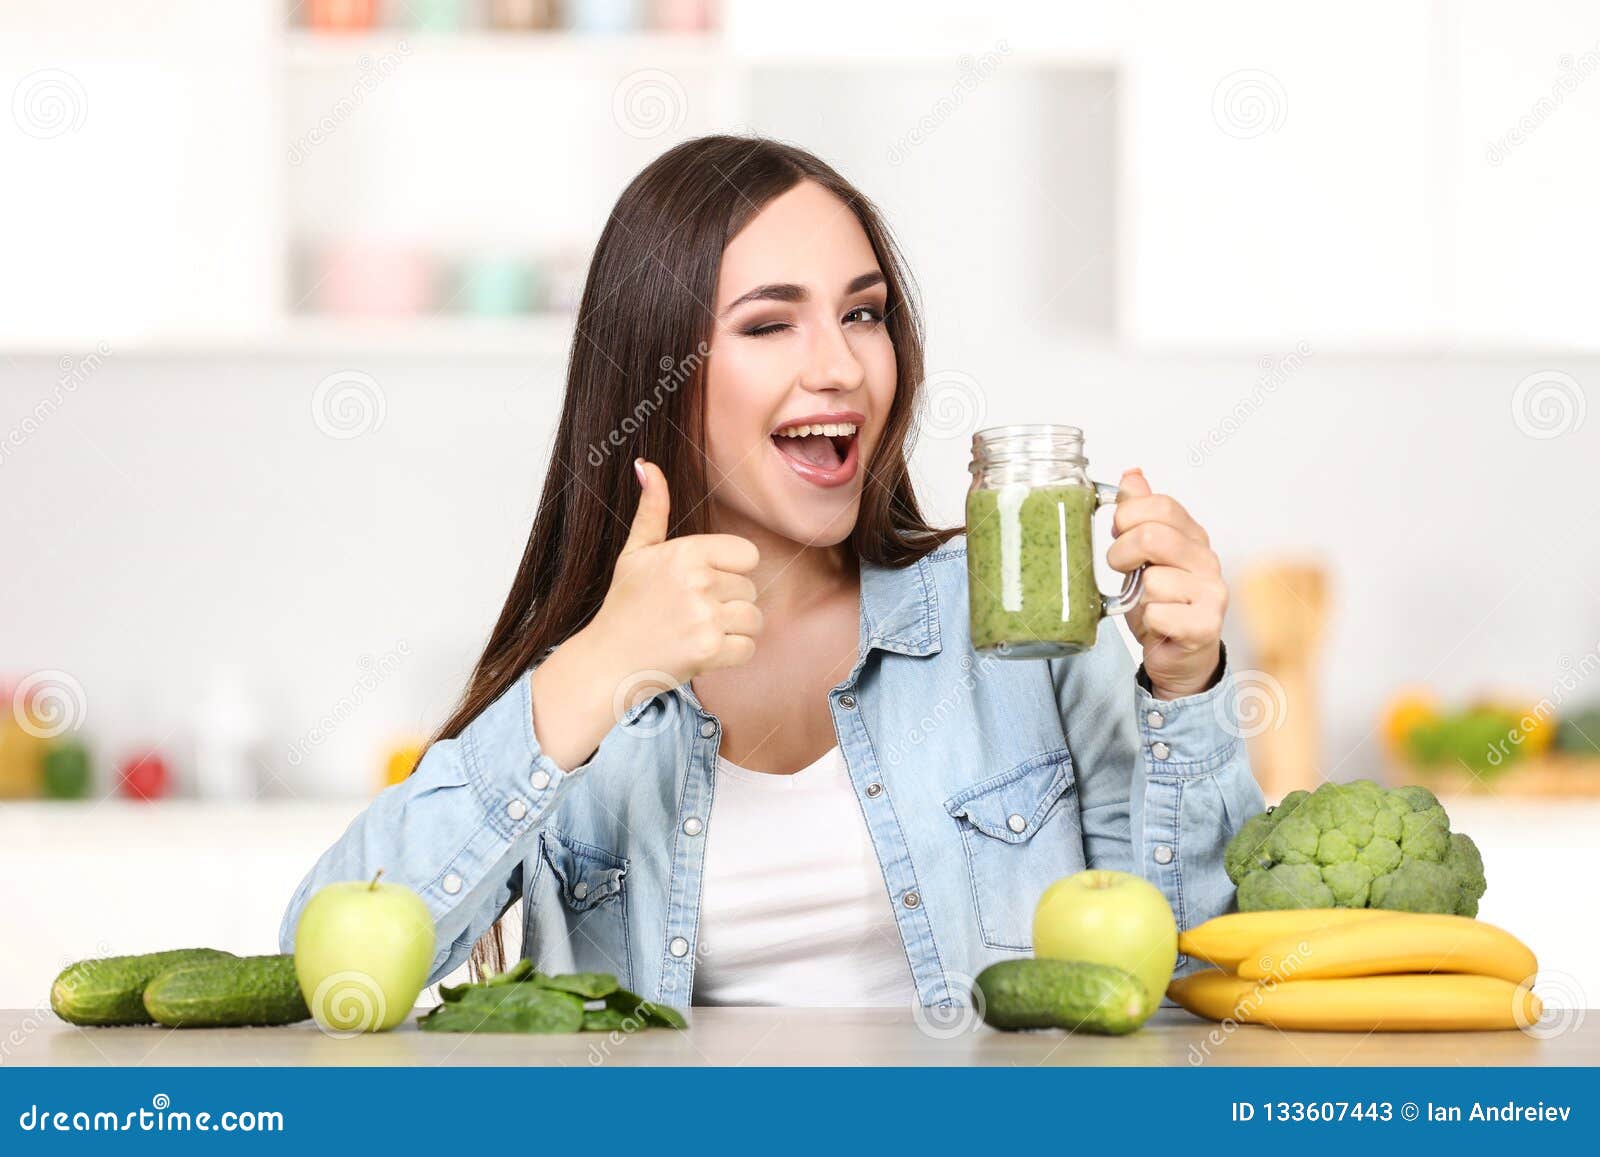 Woman Drinking Fresh Smoothie Stock Image Image Of Green Mixer 133607443 